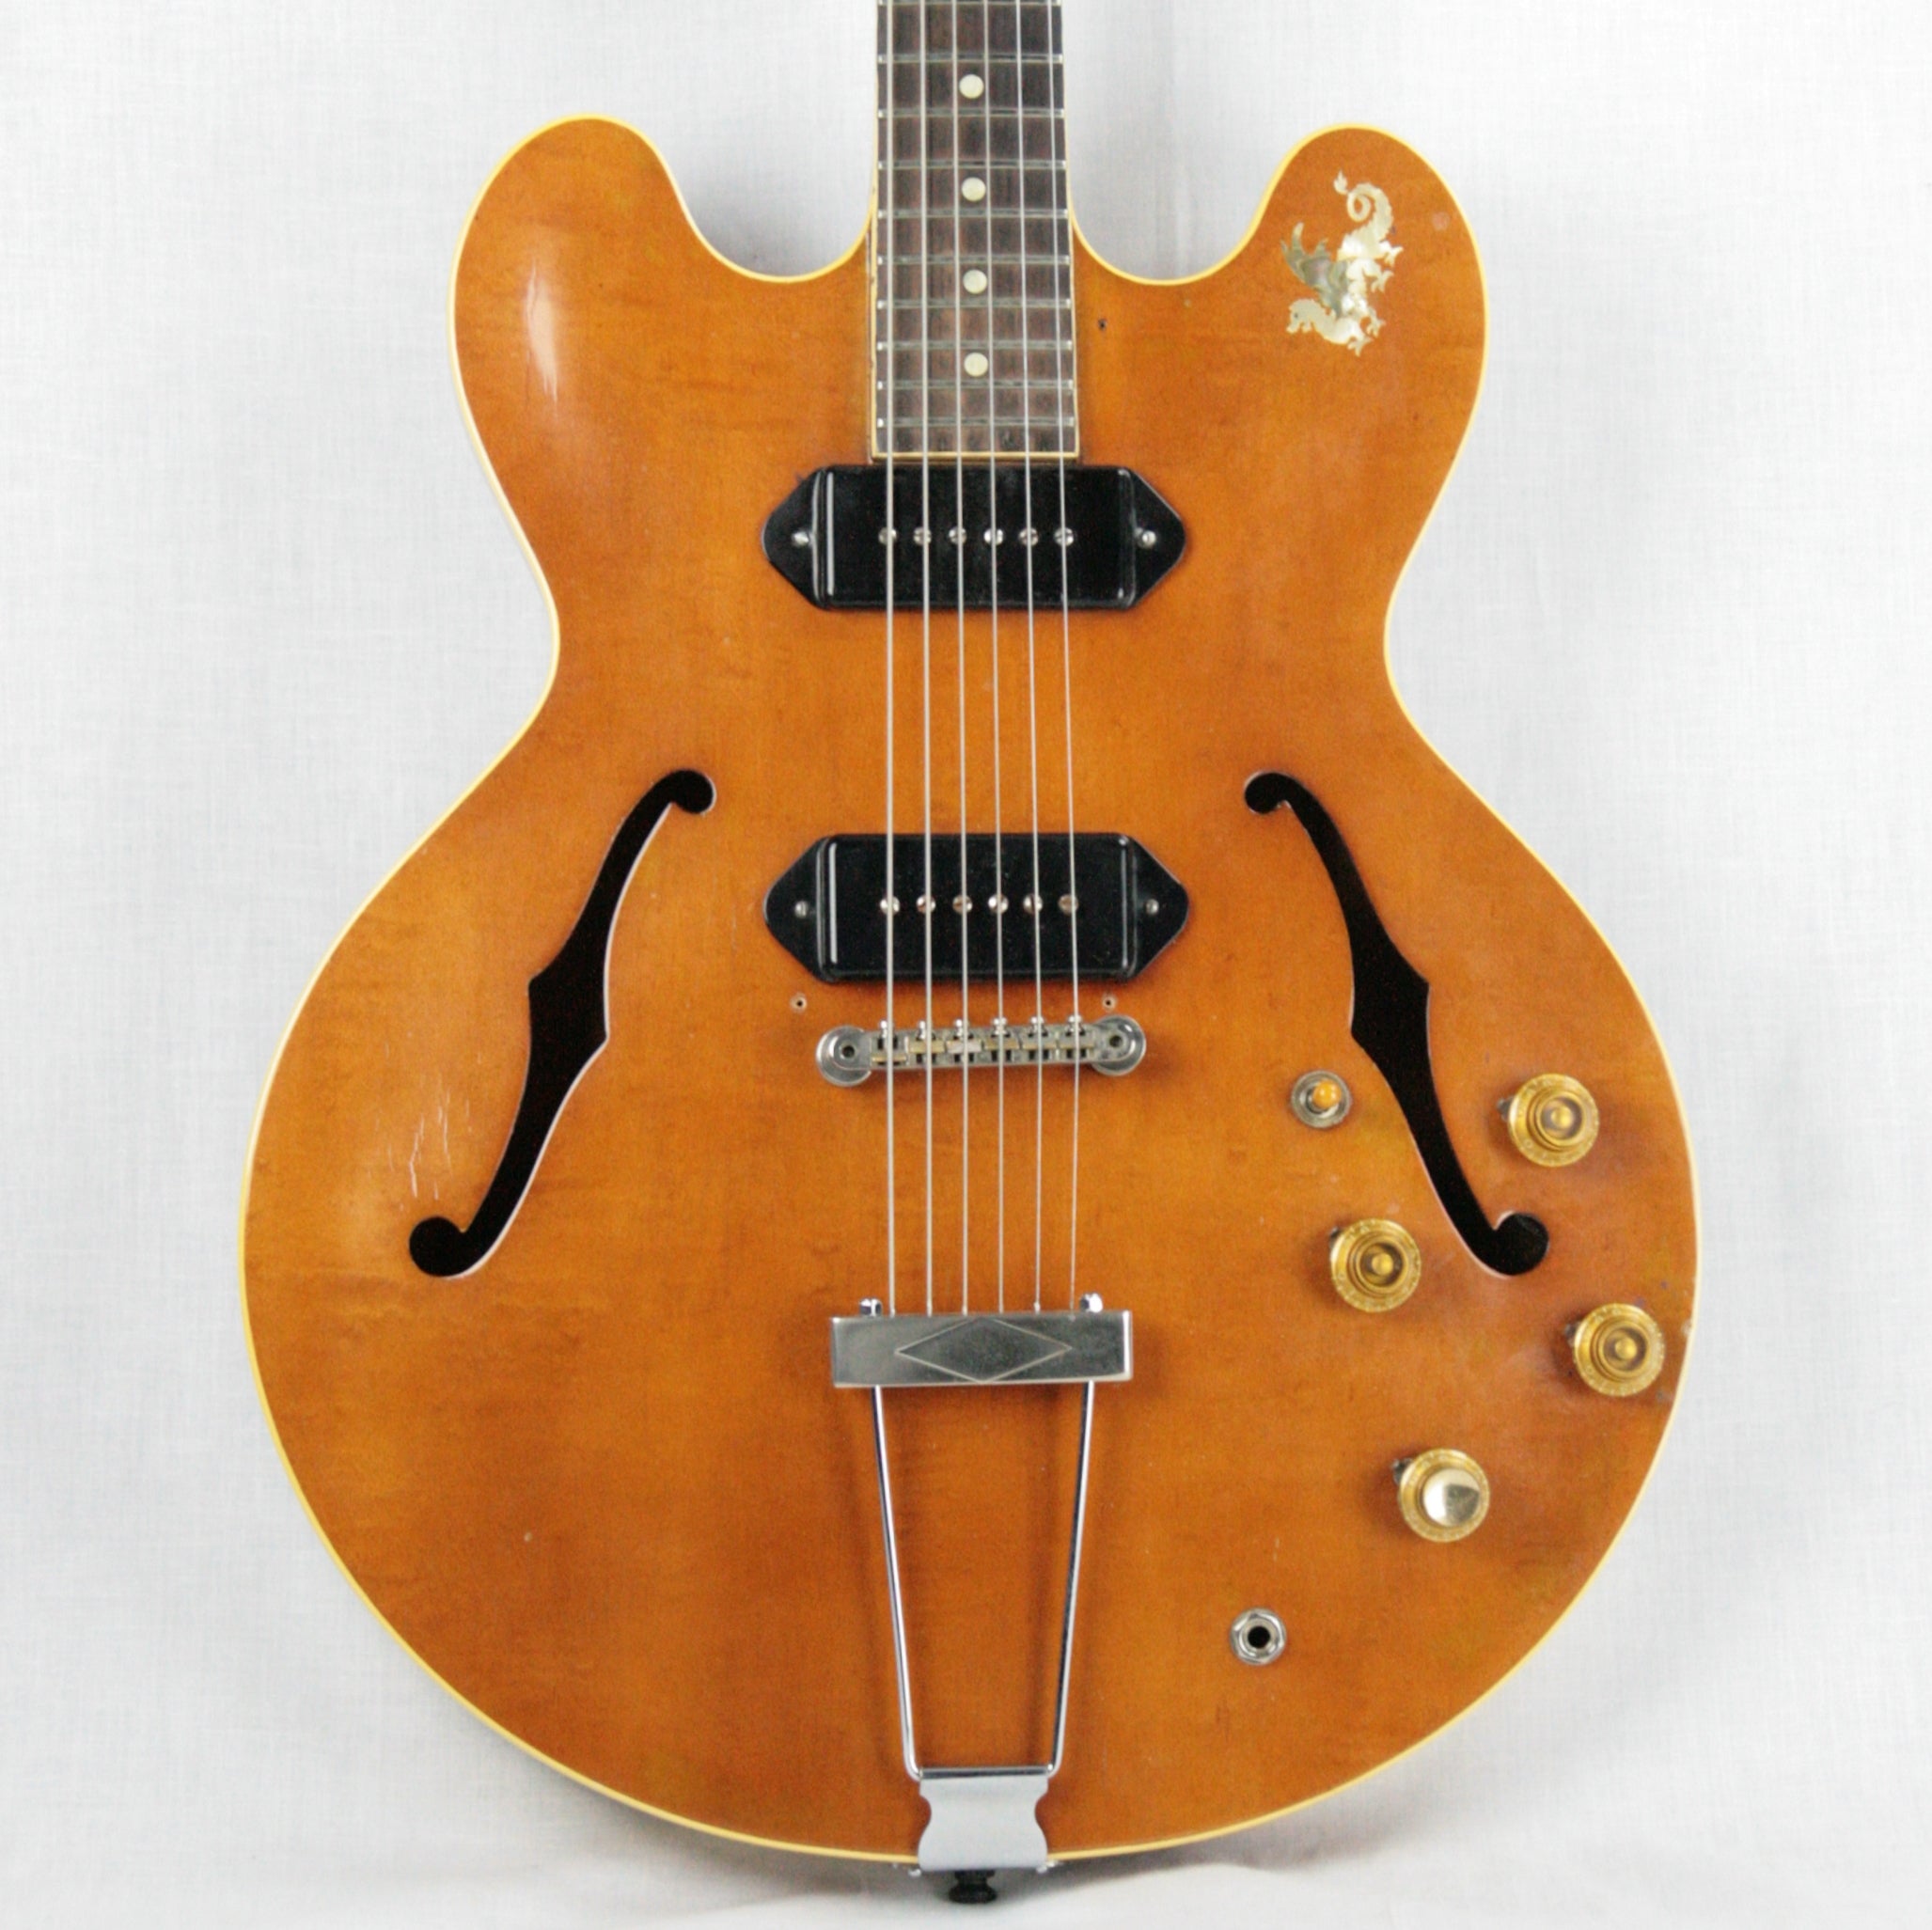 *SOLD*  1959 Gibson ES-330 TD Thinline Electric Guitar Player-Grade! 2 P90's Sound Great! 225 335